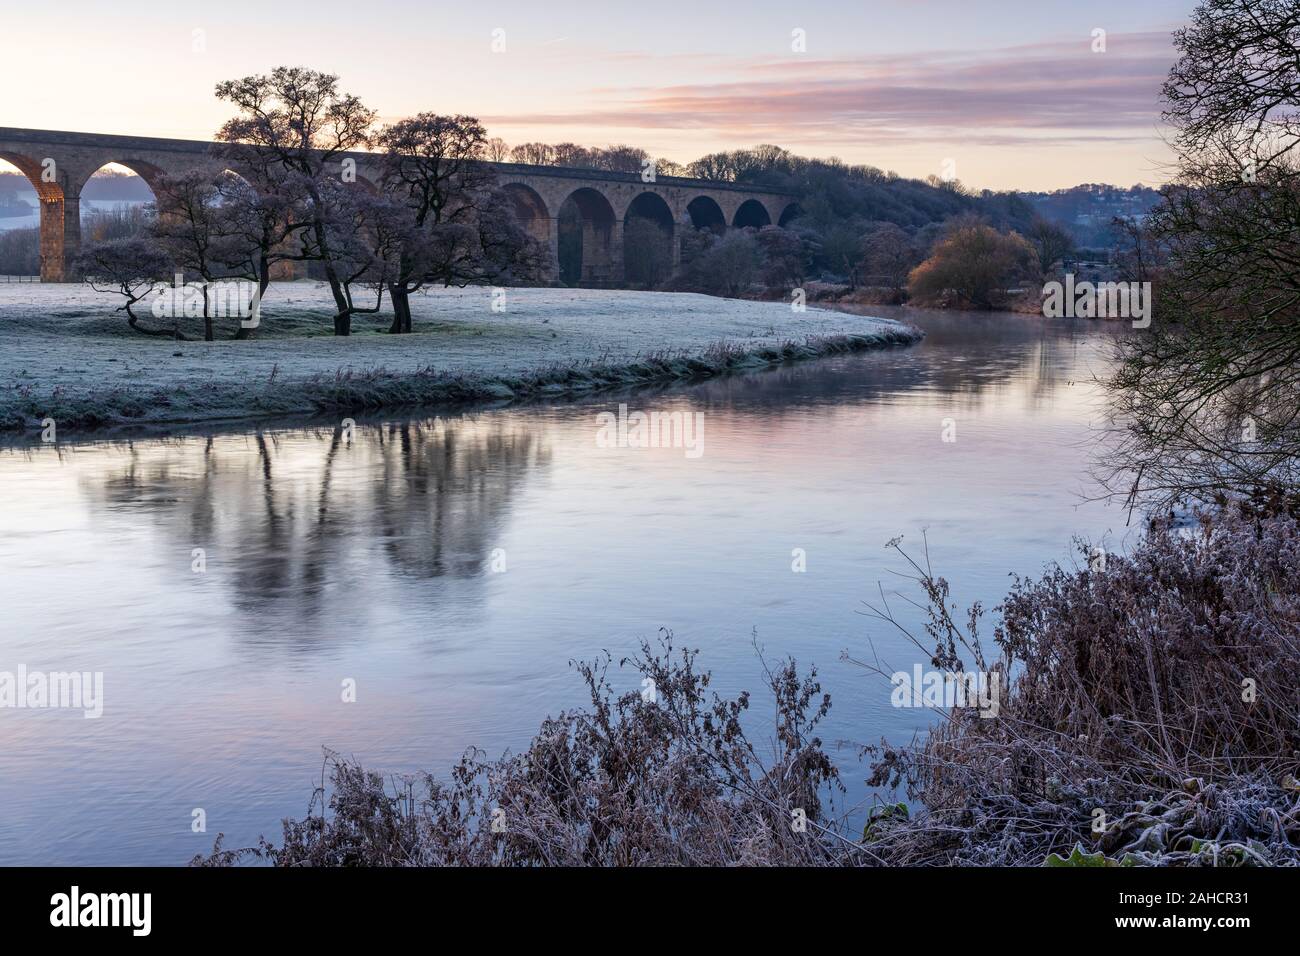 The first light of day produces pastel tones in the landscape on the bank of the River Wharfe by Arthington Viaduct on a frosty autumn morning. Stock Photo